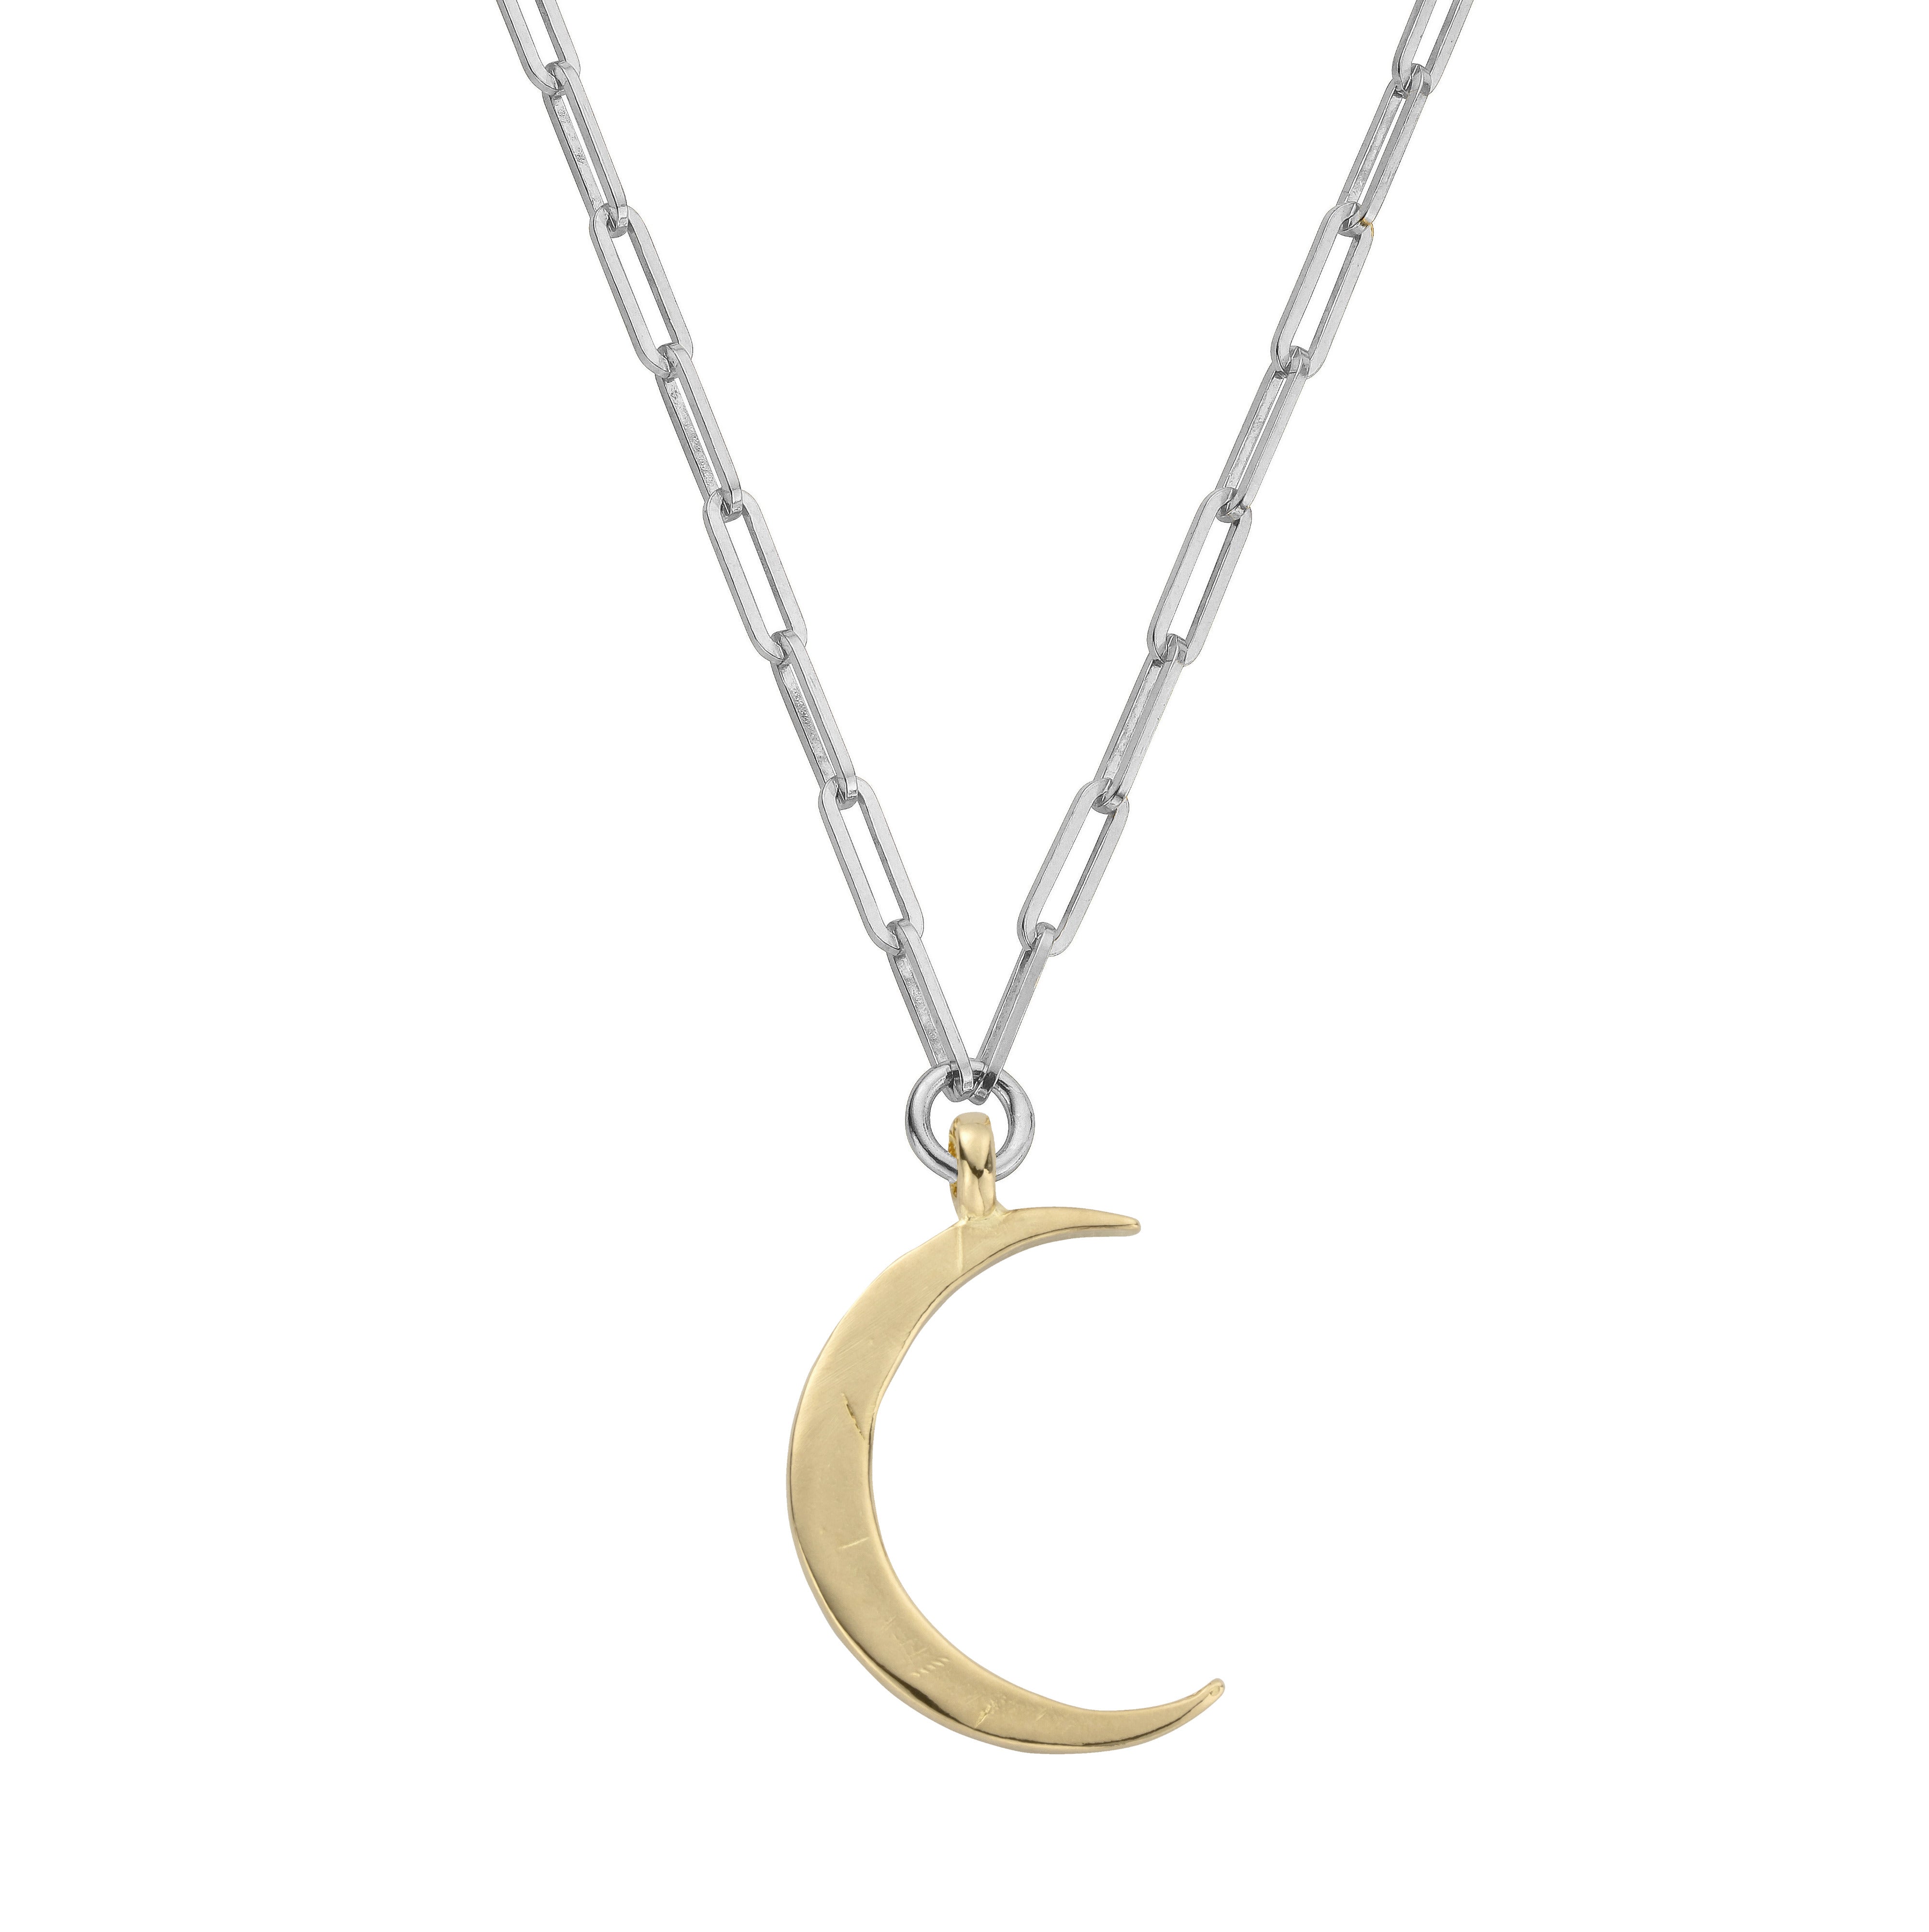 Moon Necklace, Long Crescent Necklace, Big Moon Necklace, Long Layered  Necklace, I Love You to the Moon, Moon Stars Jewelry, Gift for Woman - Etsy  | Moon necklace, Crescent necklace, Star jewelry